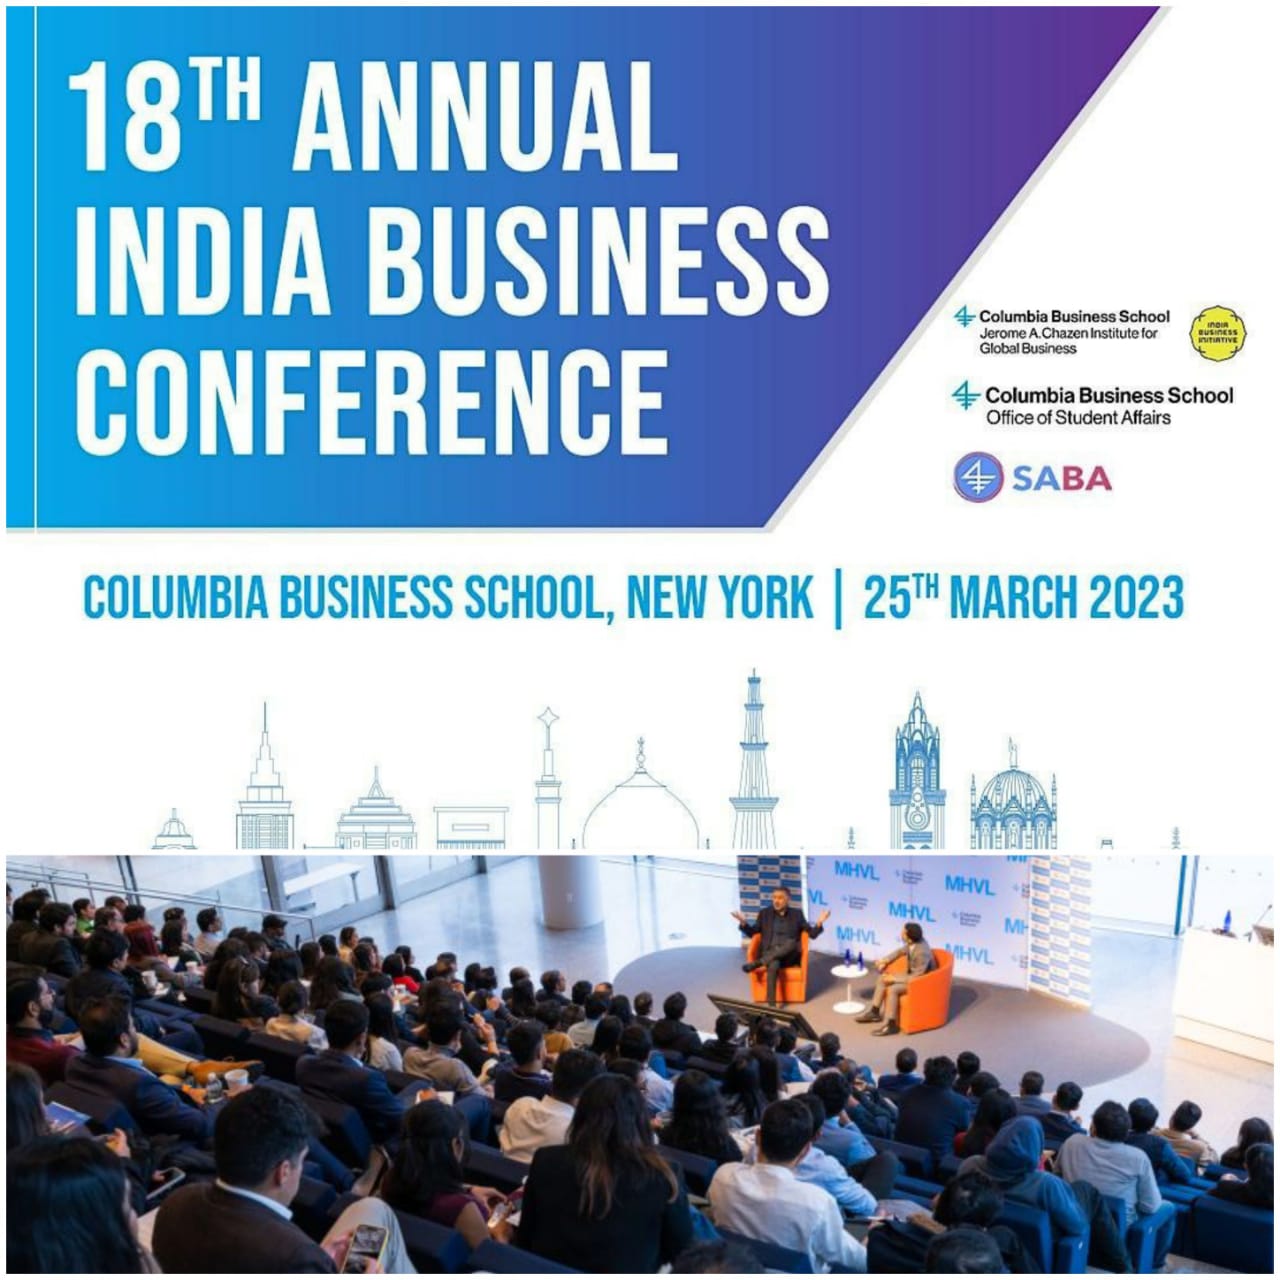 18th India Business Conference organized at the Columbia Business School